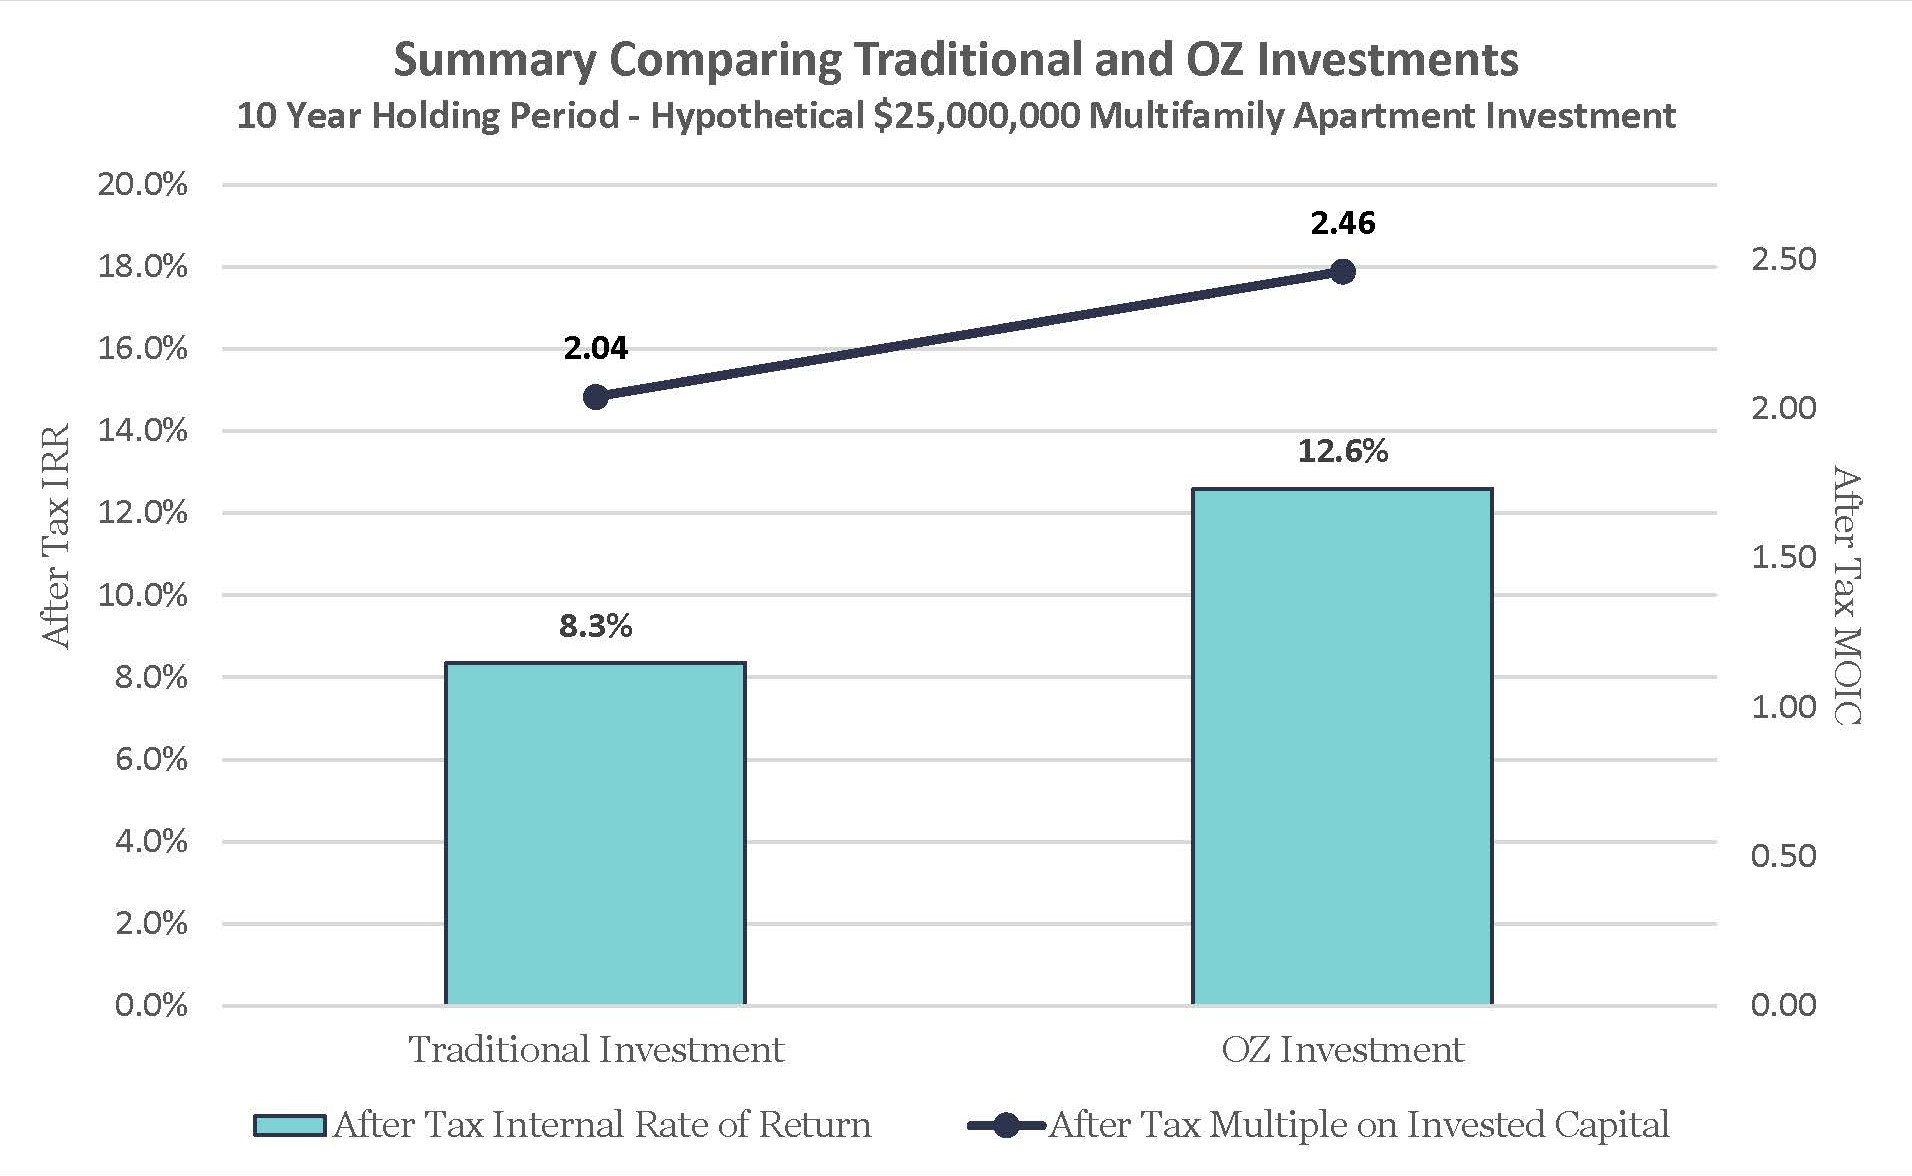 Summary Comparing Traditional and OZ Investments: CLA